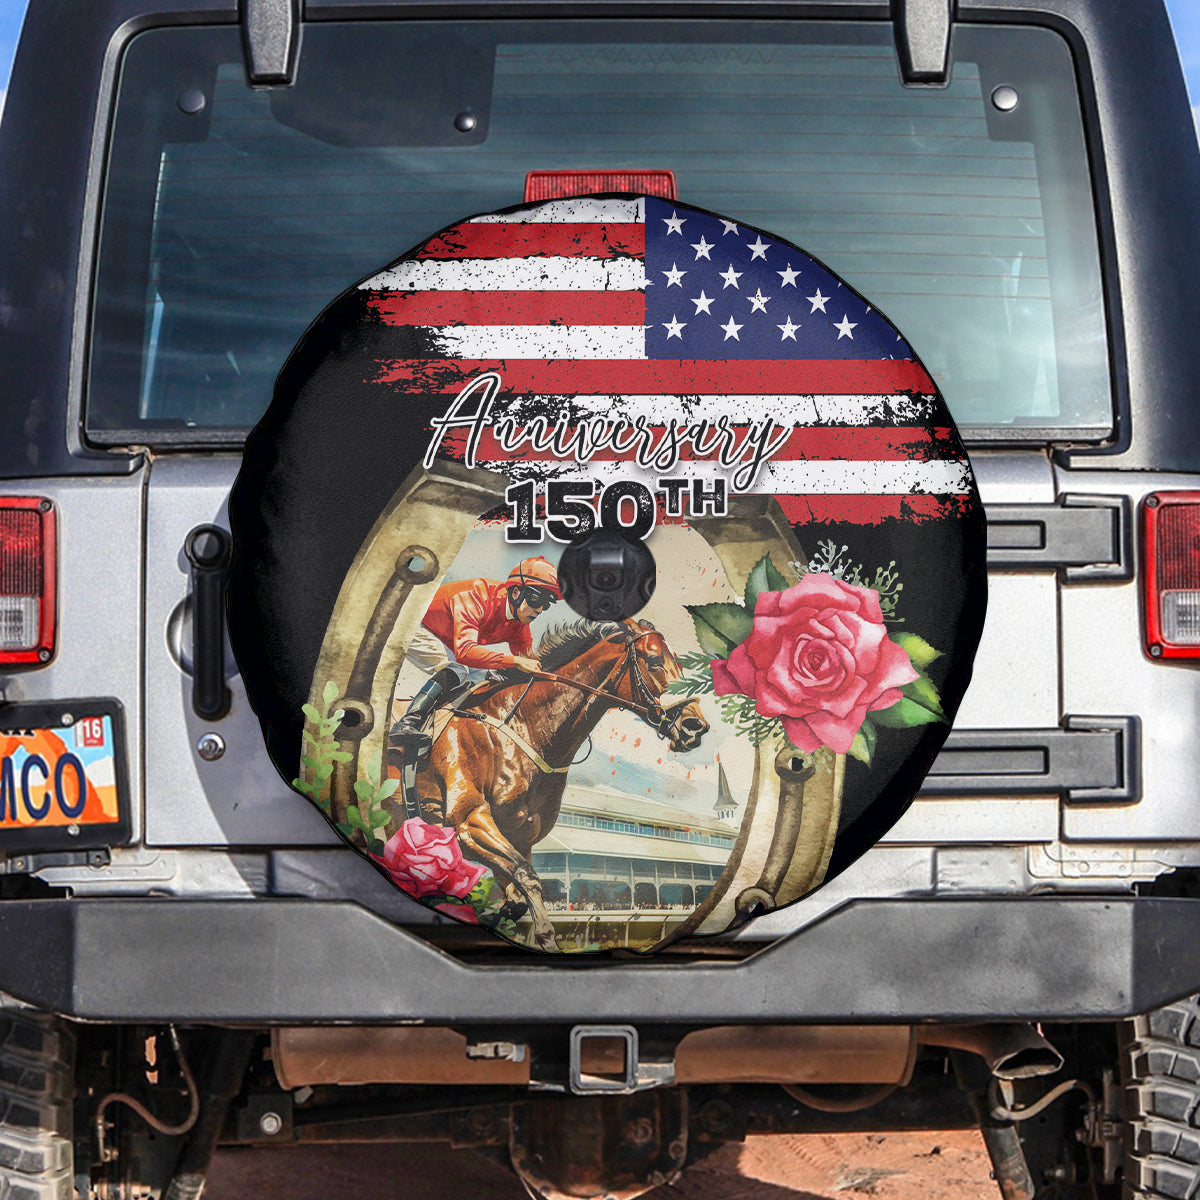 Kentucky Race For Rose 150th Spare Tire Cover Horseshoe With American Flag Vintage Style